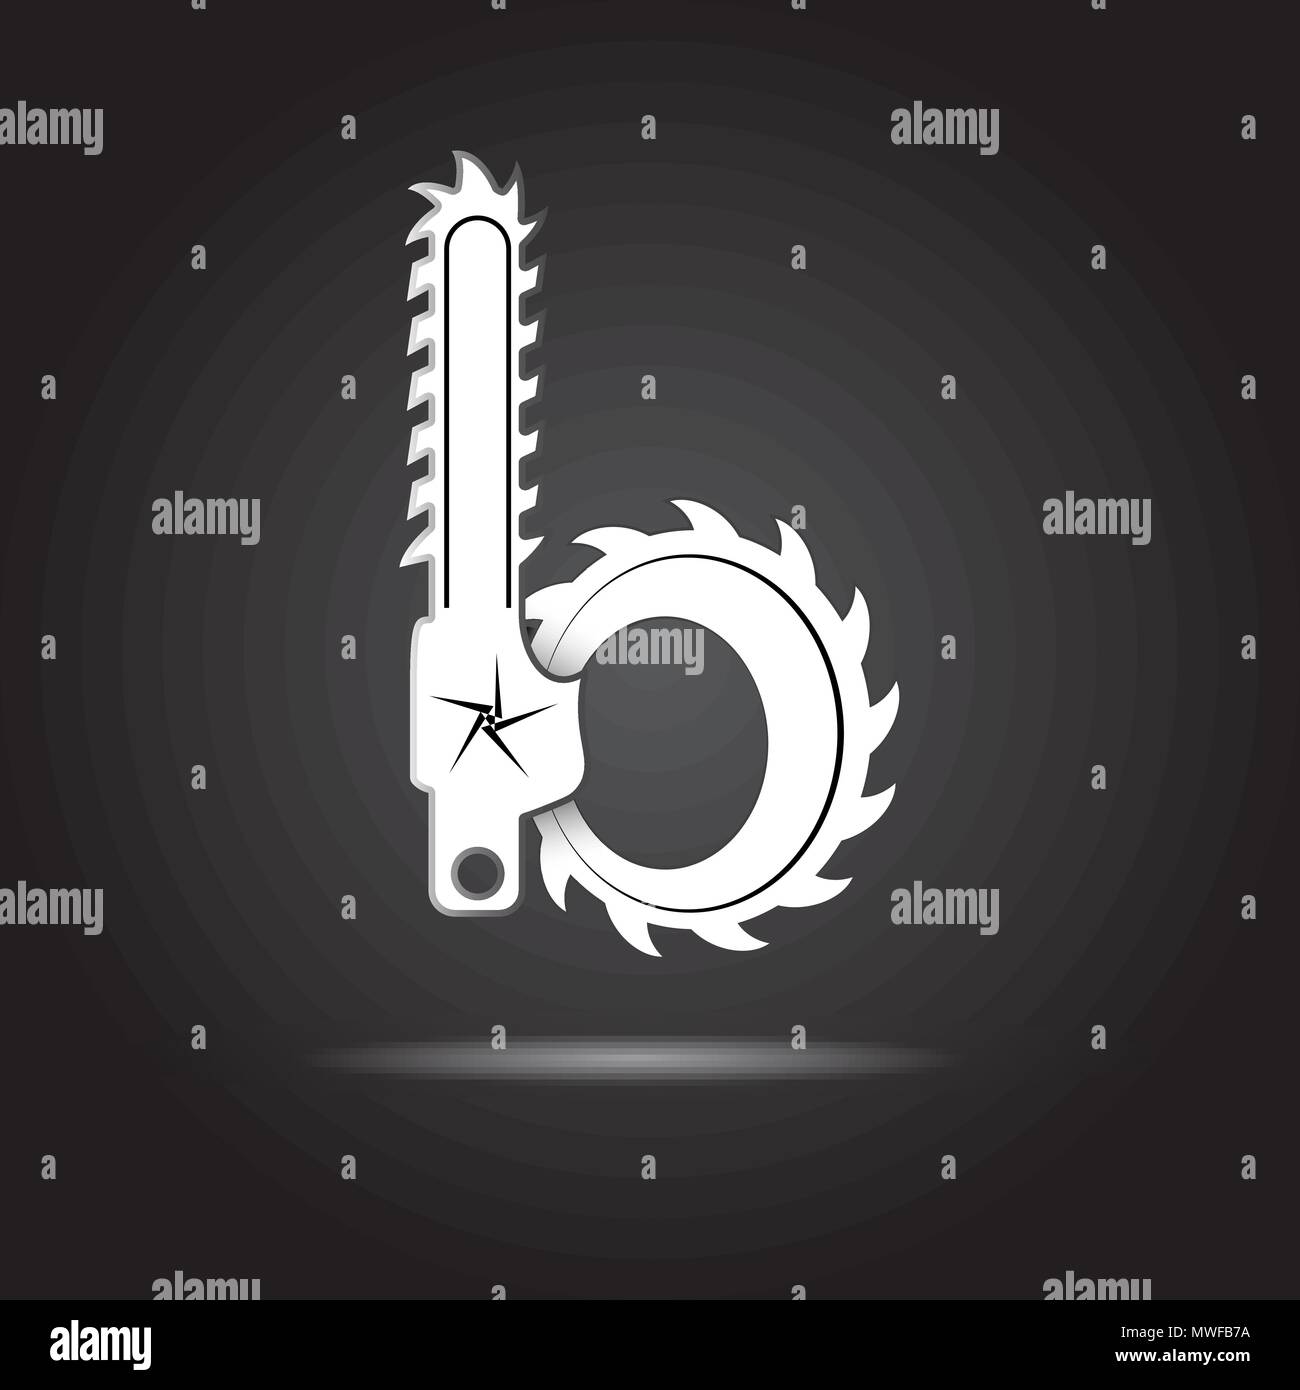 Lowercase letter b in shape of chainsaw - creative logotype design for power tools woodworking company Stock Vector